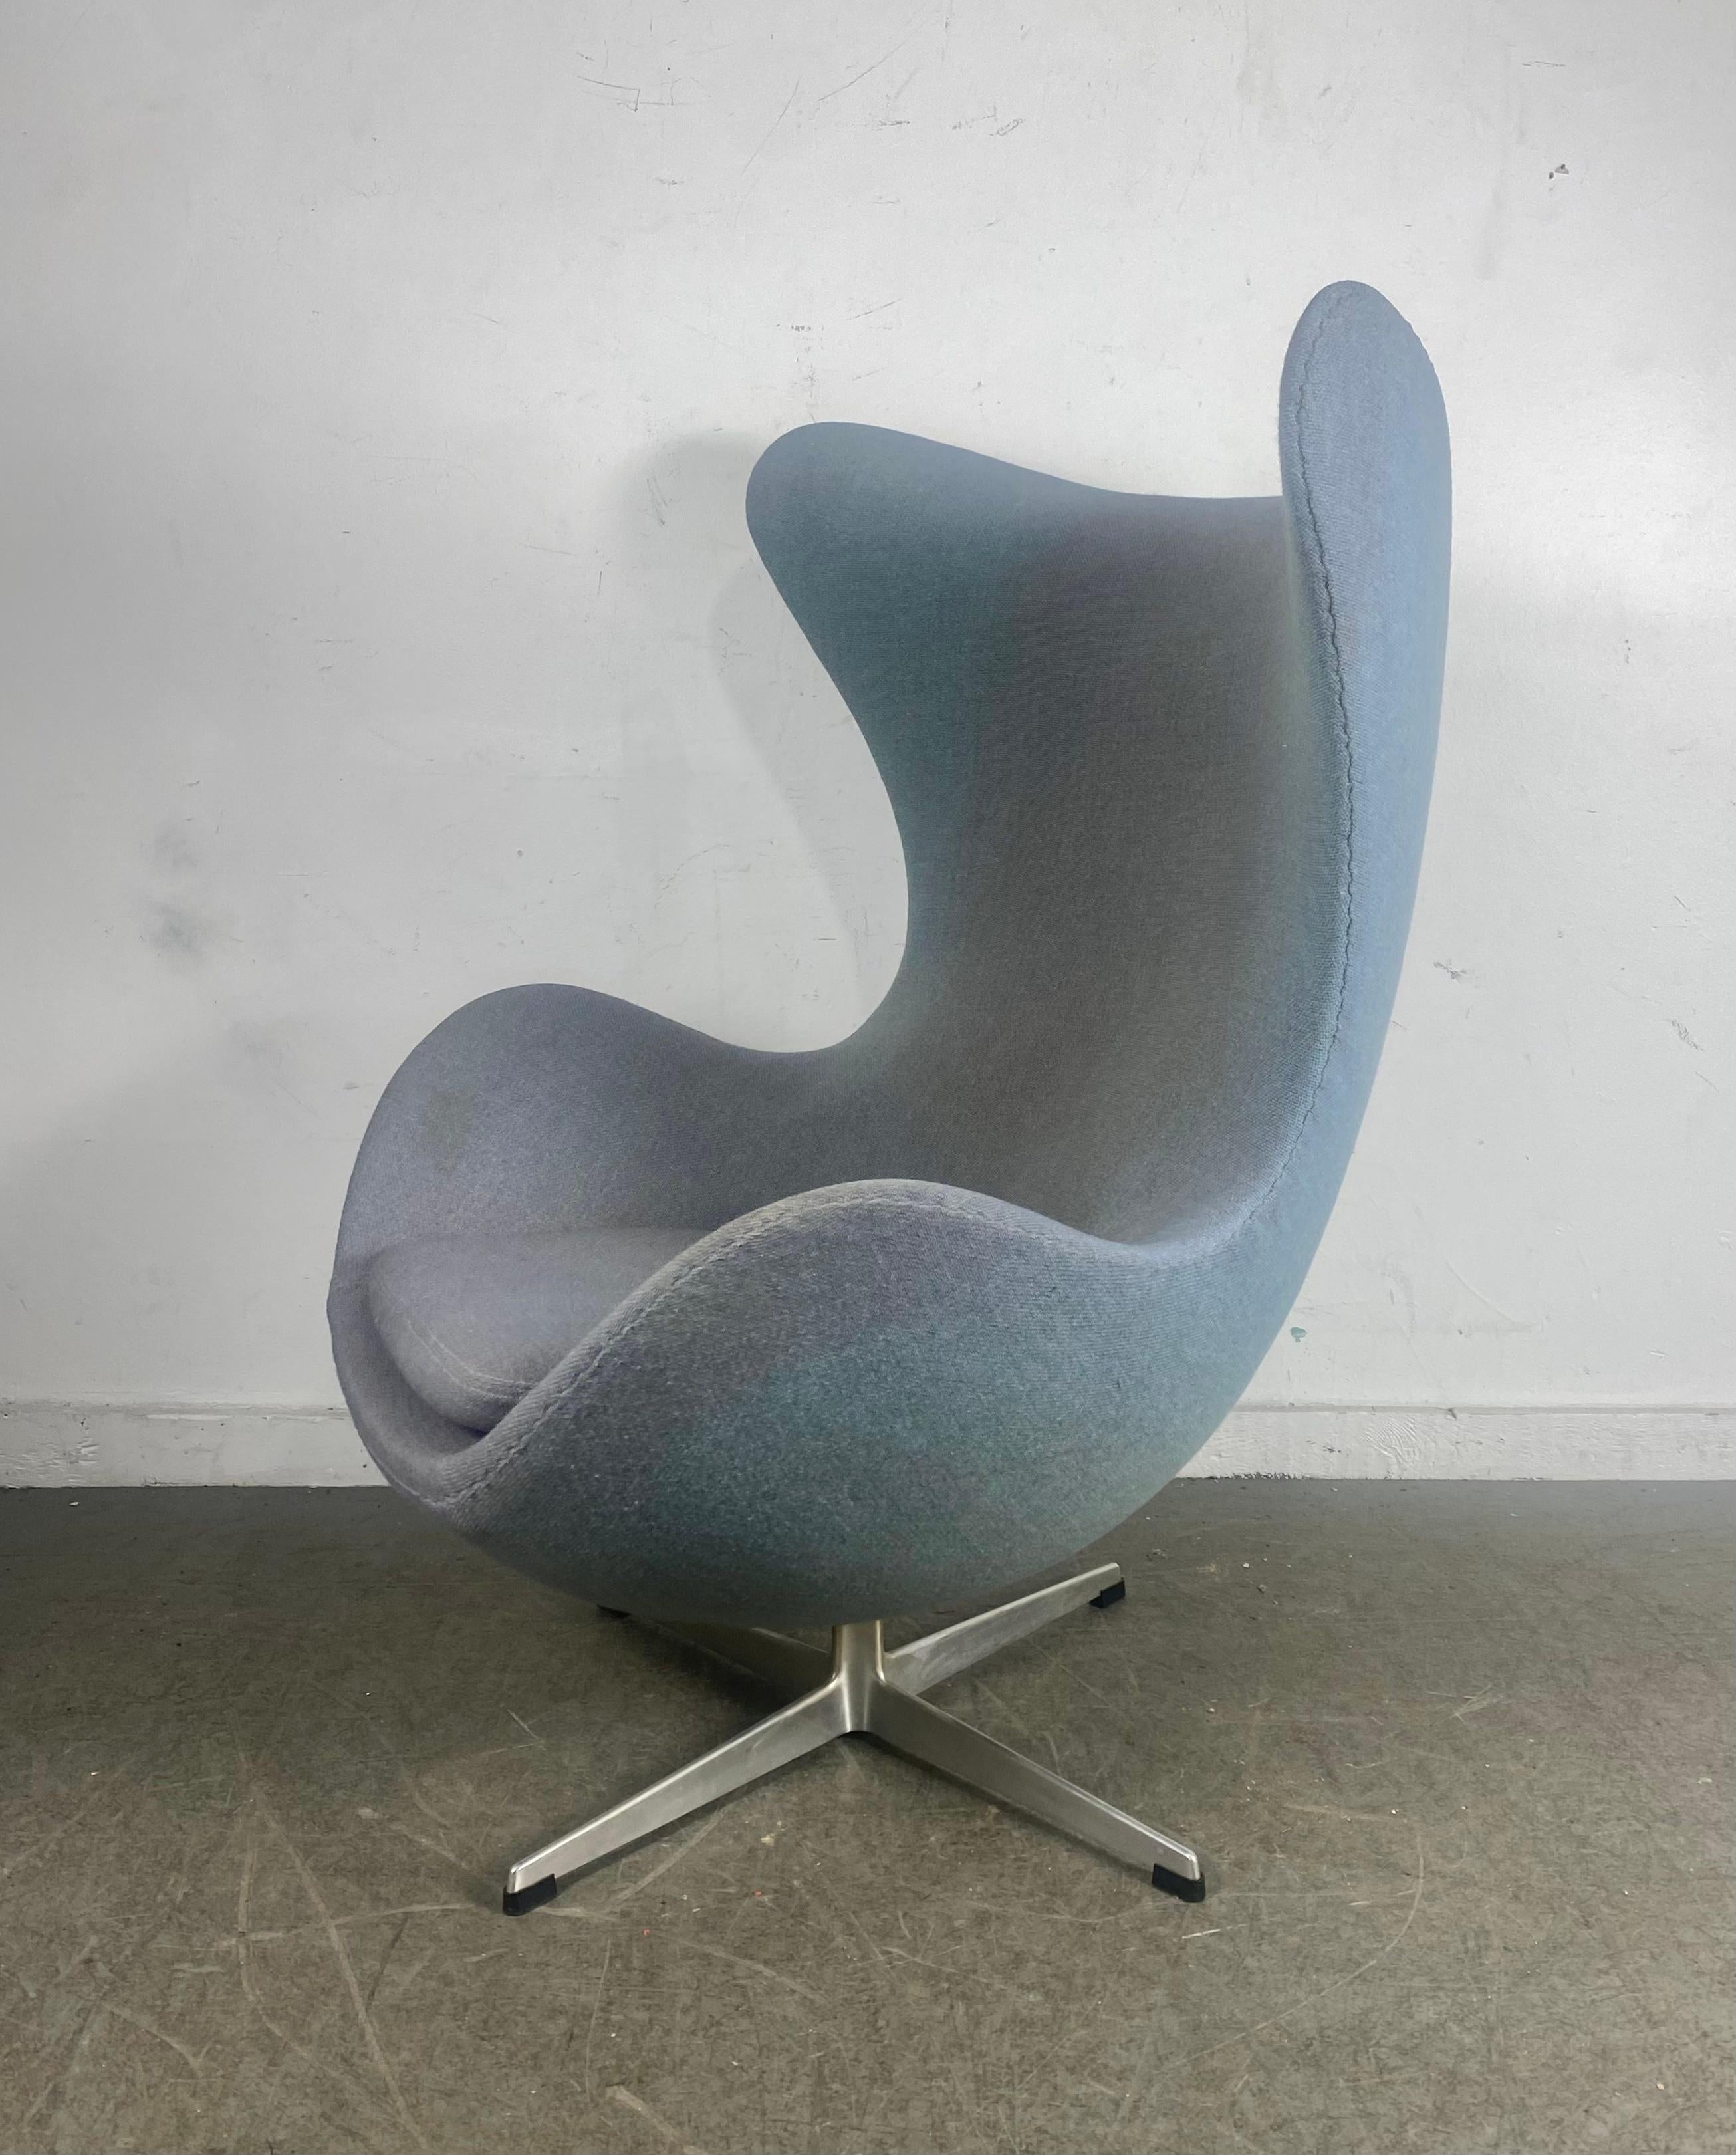 Nice early egg chair designed by Arne Jacobsen manufactured by Fritzhansen. made in Denmark.. Retains original grey/blue wool fabric in usable condition..minor fading, discoloration.Hand delivery avail to New York City or anywhere en route from